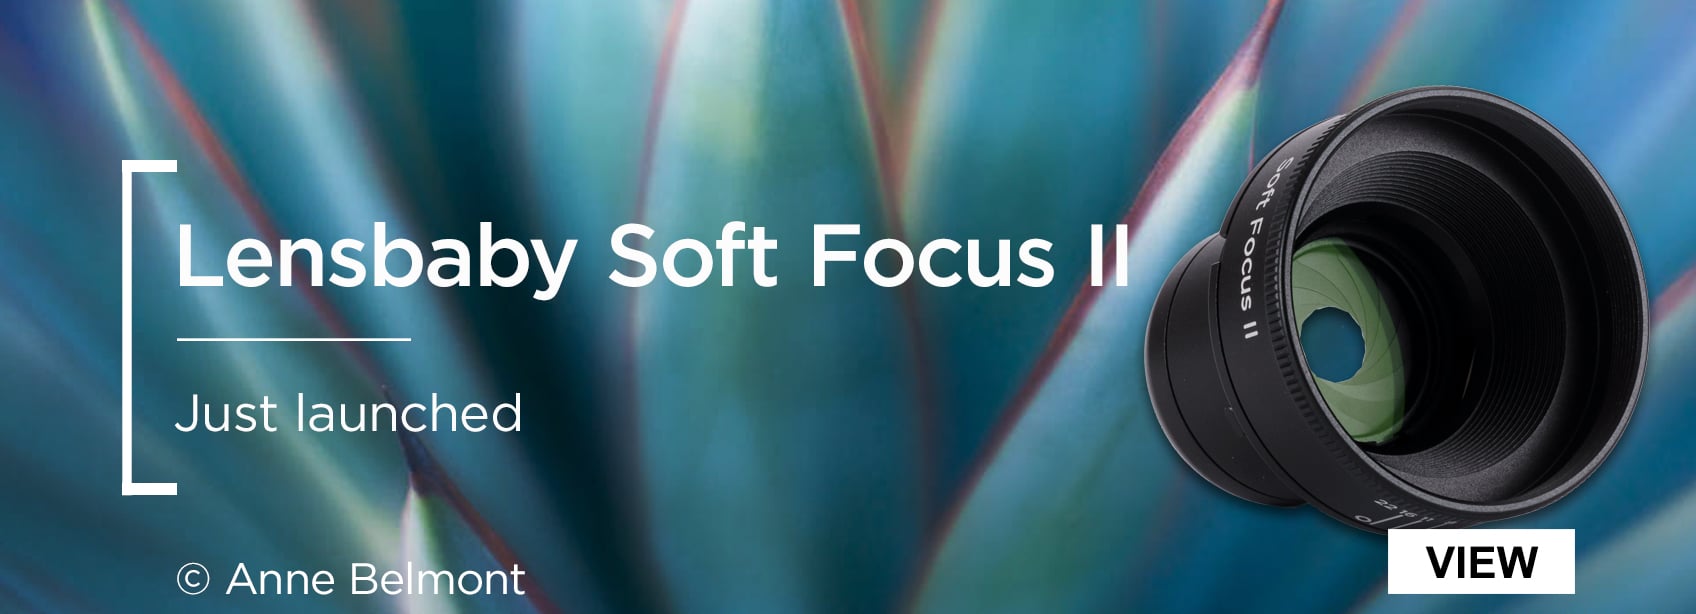 Lensbaby Soft Focus II - Just launched